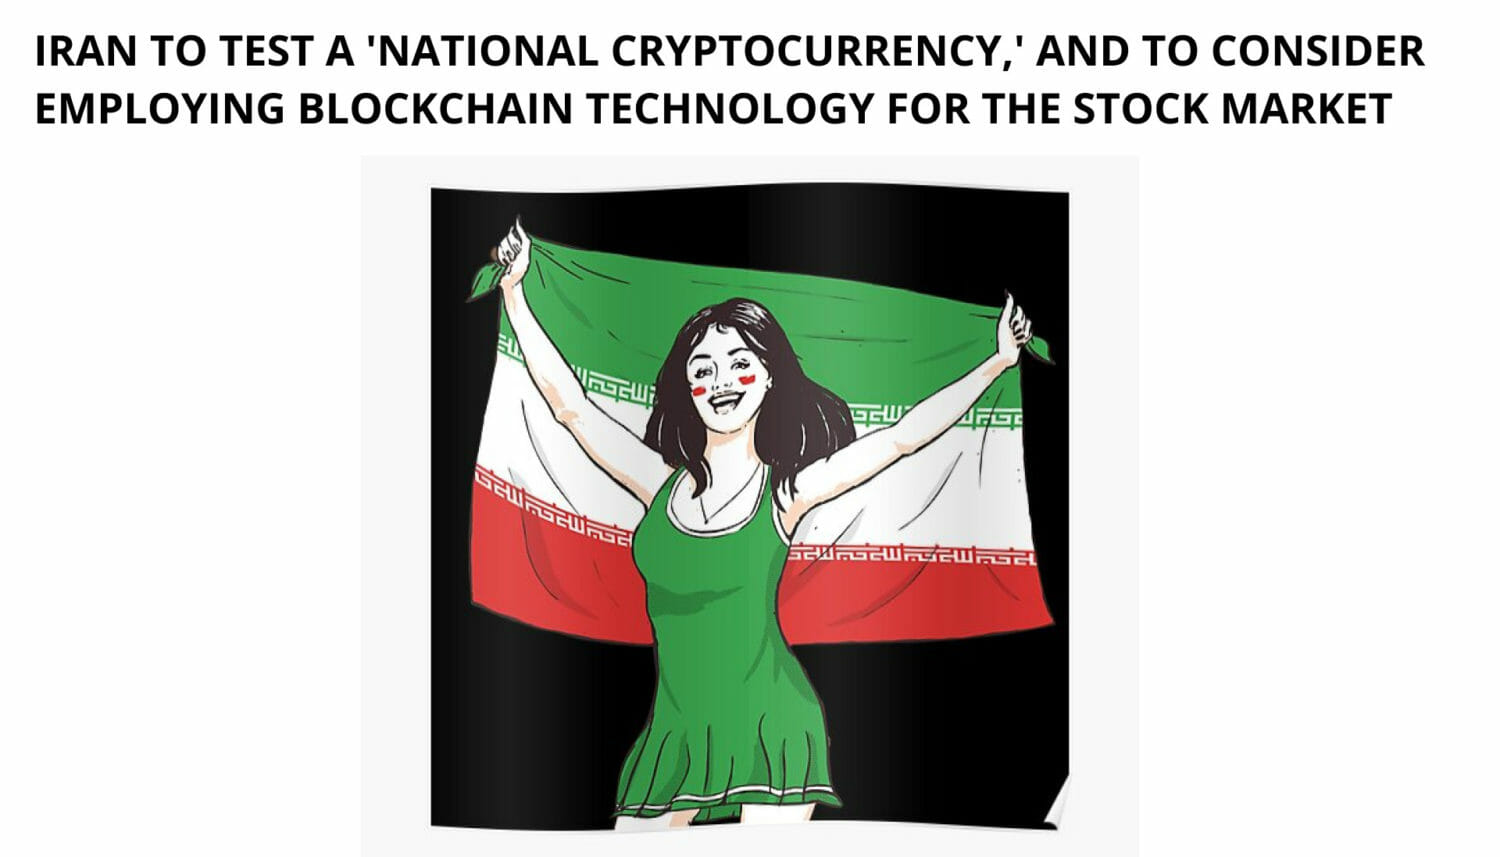 Iran To Test A 'National Cryptocurrency'